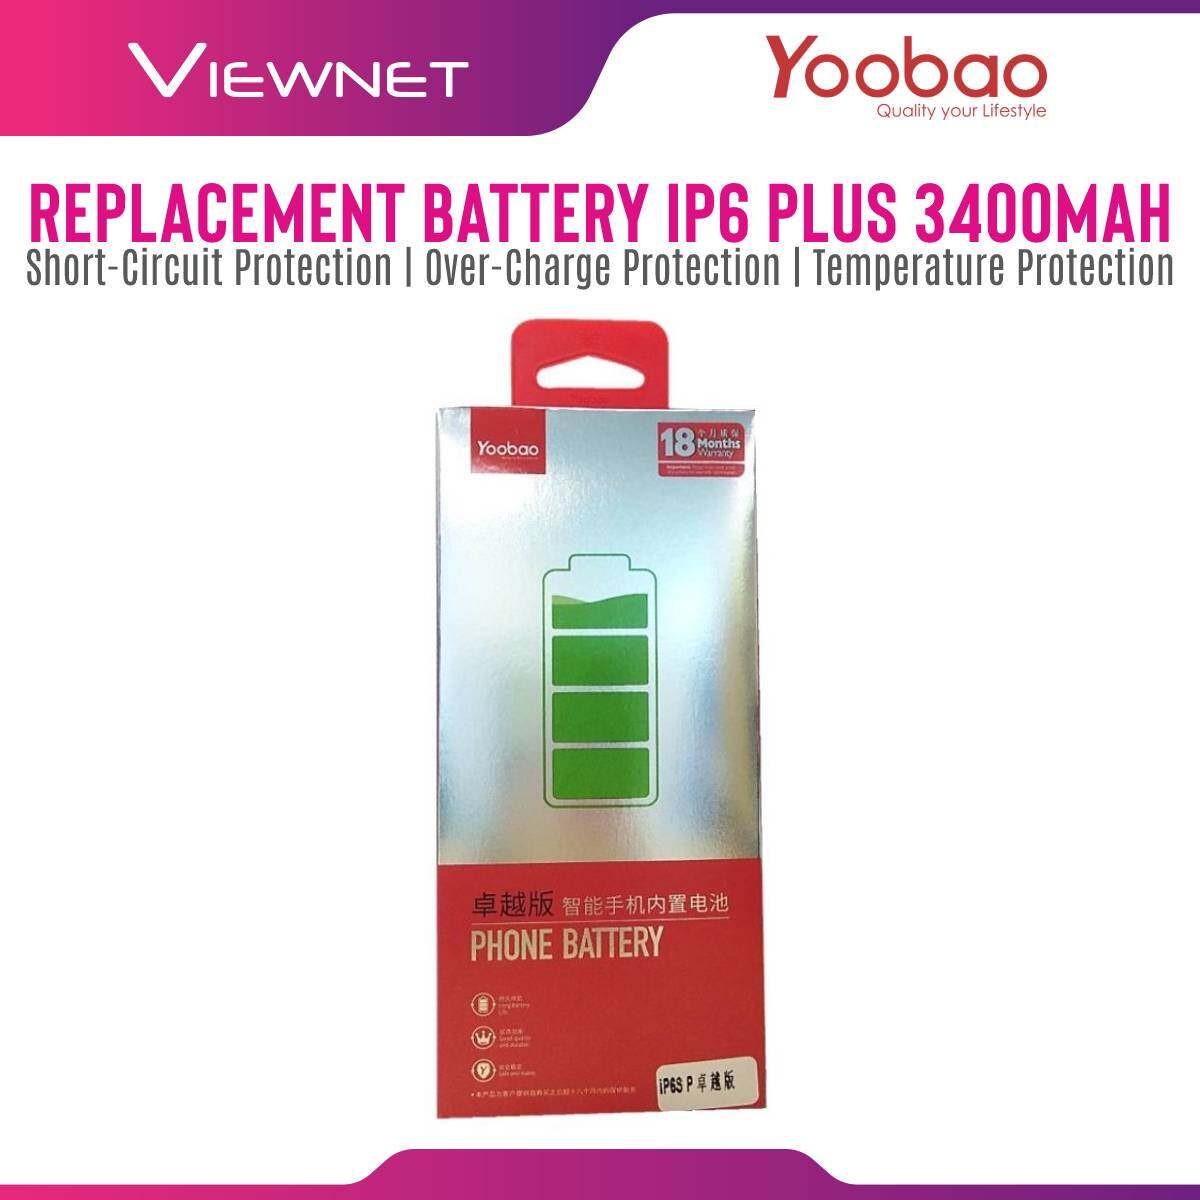 Yoobao 3400mAh ATL Version iPhone 6 Plus Replacement Phone Battery Long Battery Life with 12 Month Warranty